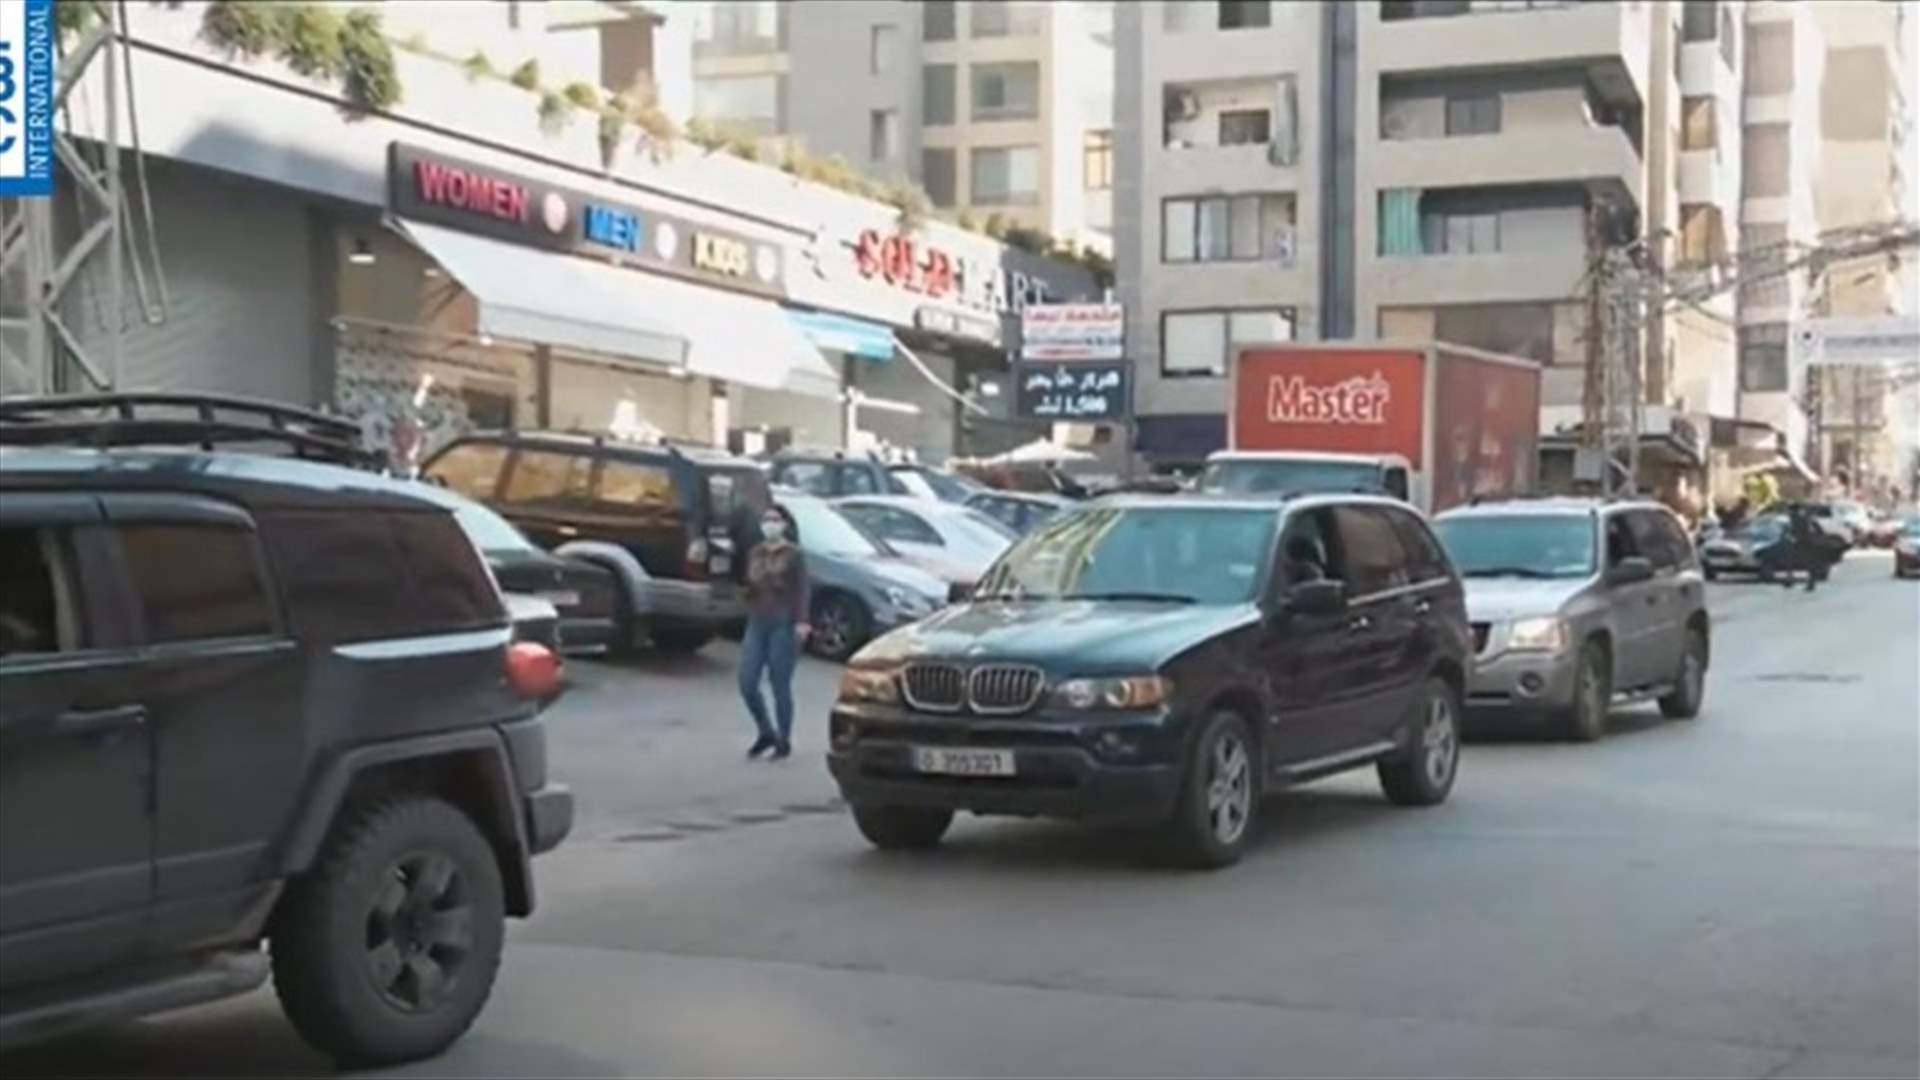 The scene after reopening of the country: Traffic and crowded shops (video)